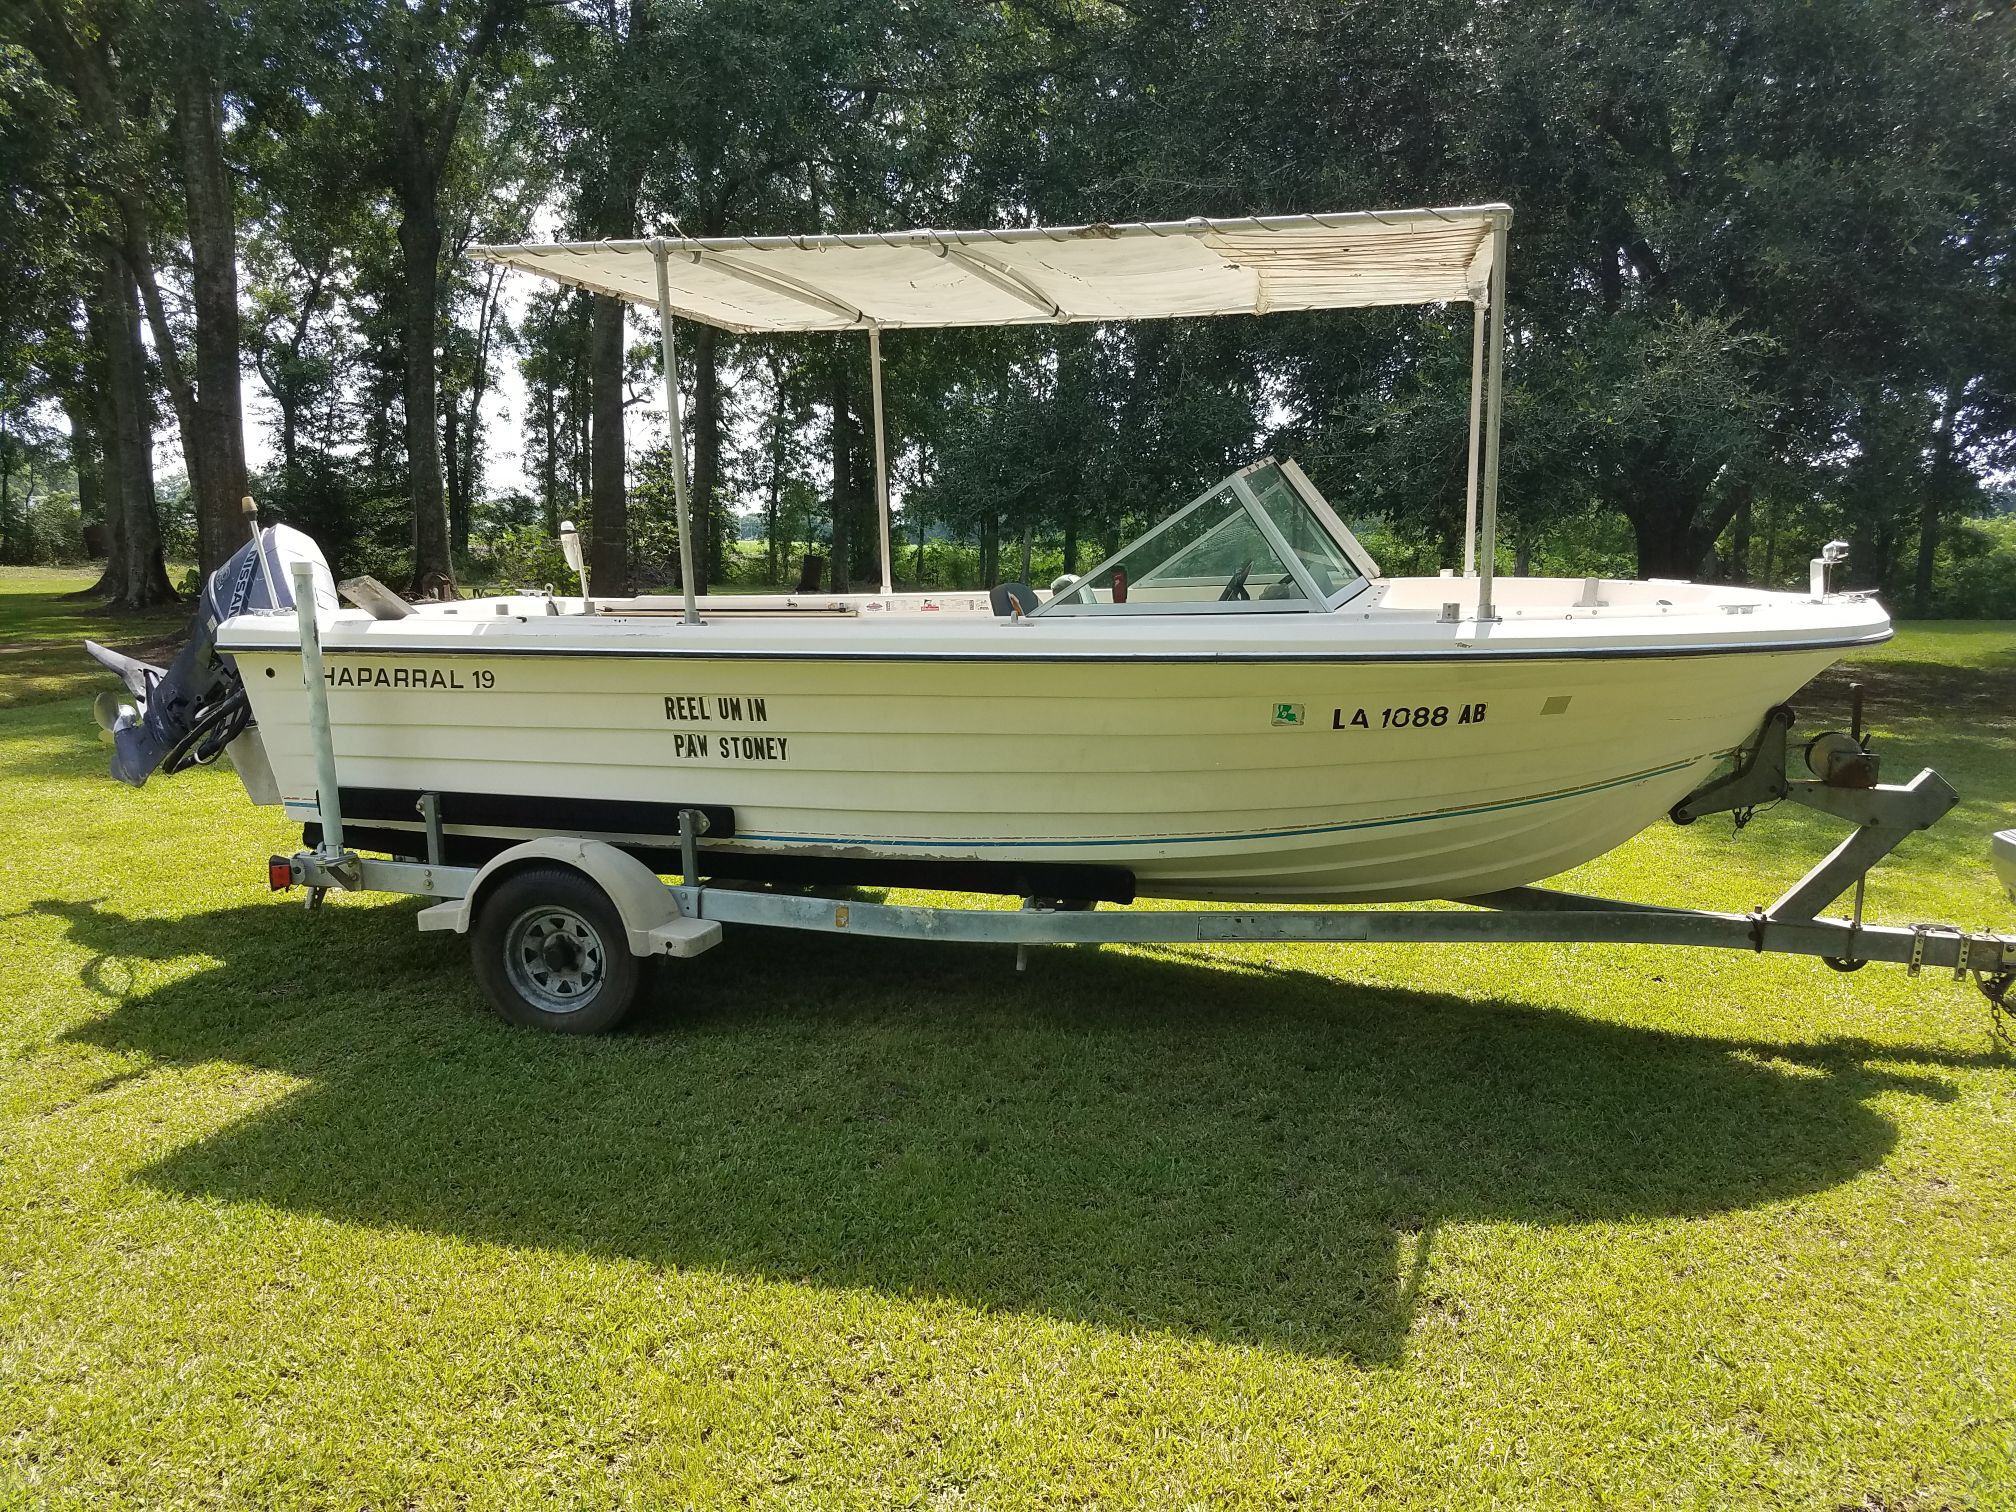  Boat is 18' with trailer included. 